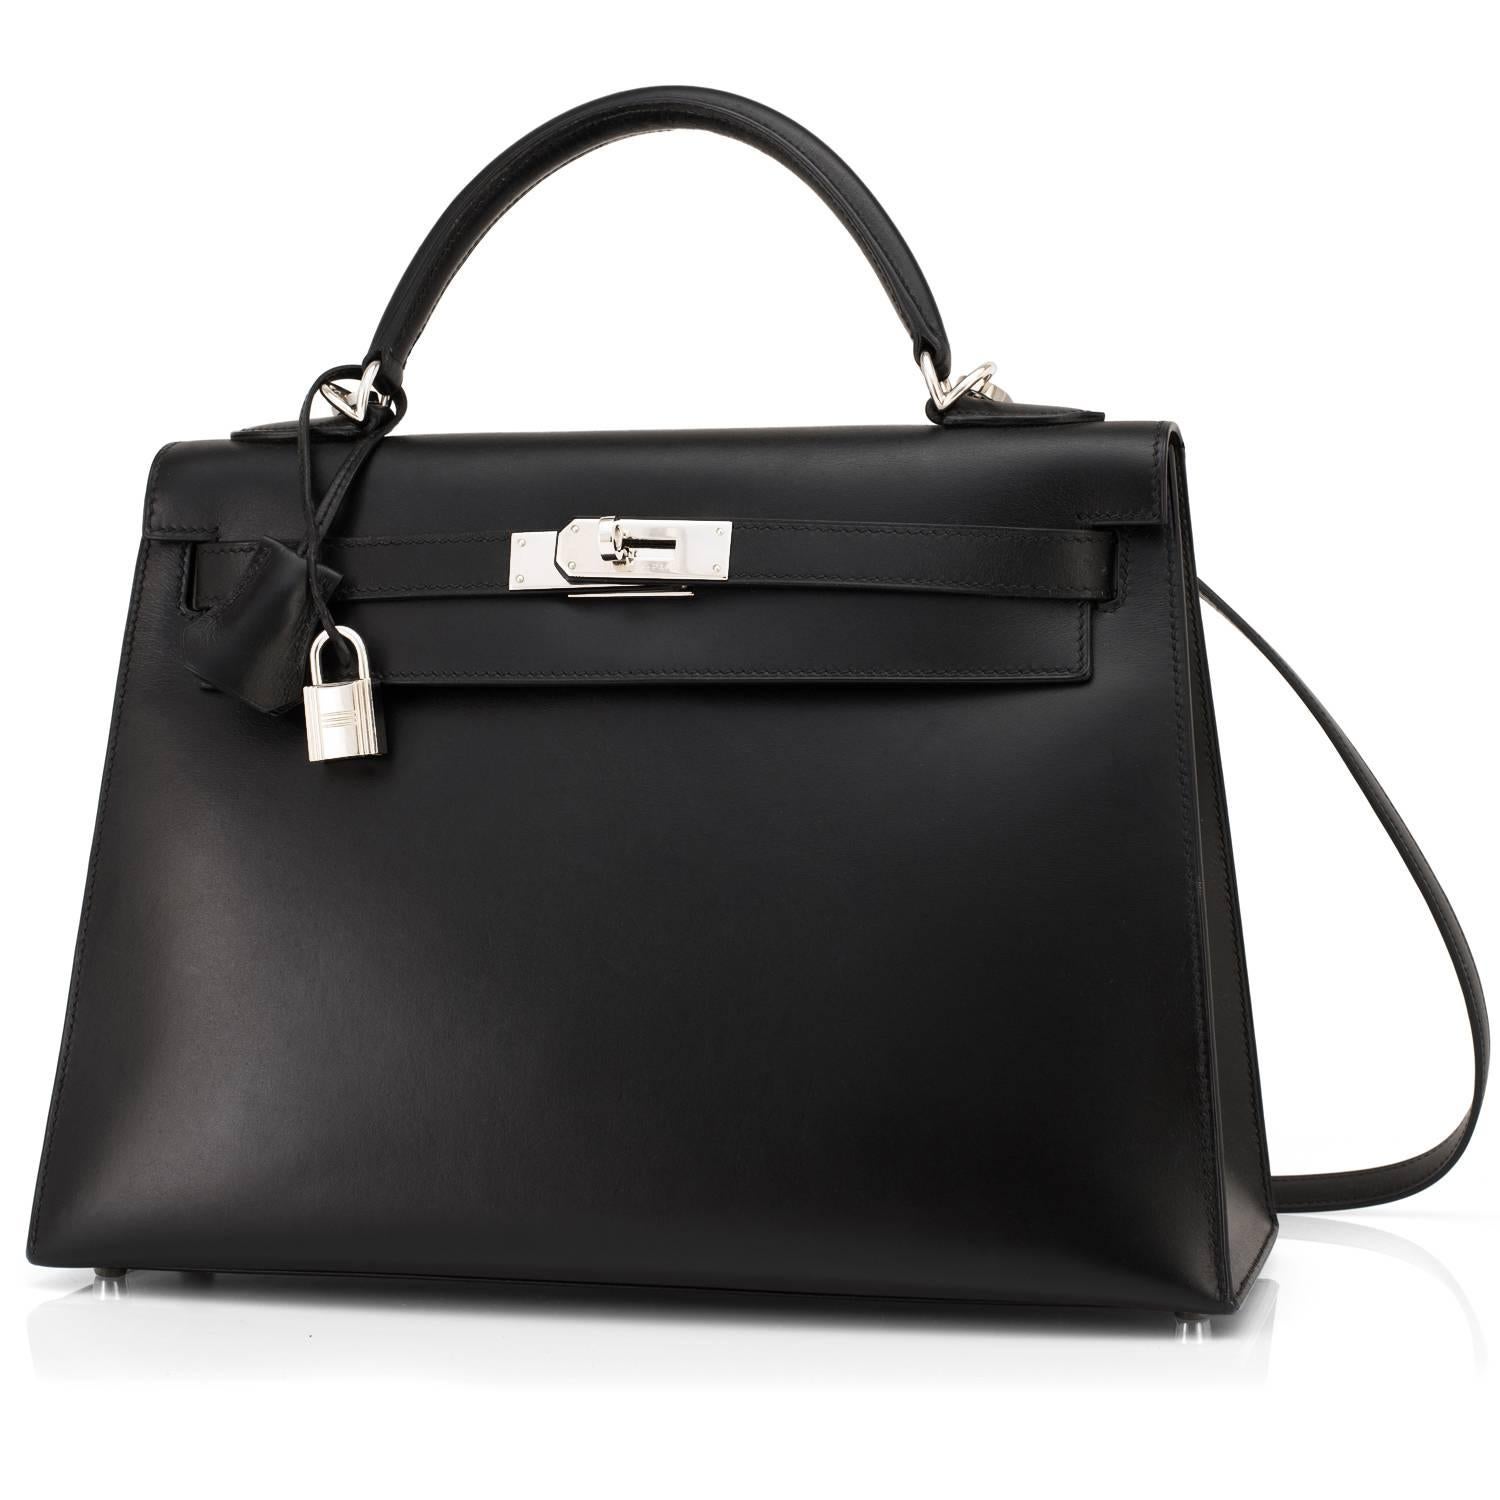 Hermes Black Box Kelly 32cm Shoulder Bag Palladium Hardware 
Black Box Kelly is modern and sexy set with fresh palladium hardware.
In a perfect 32cm Sellier which holds almost as much as a Birkin 30, while lending a flawless architecture to any